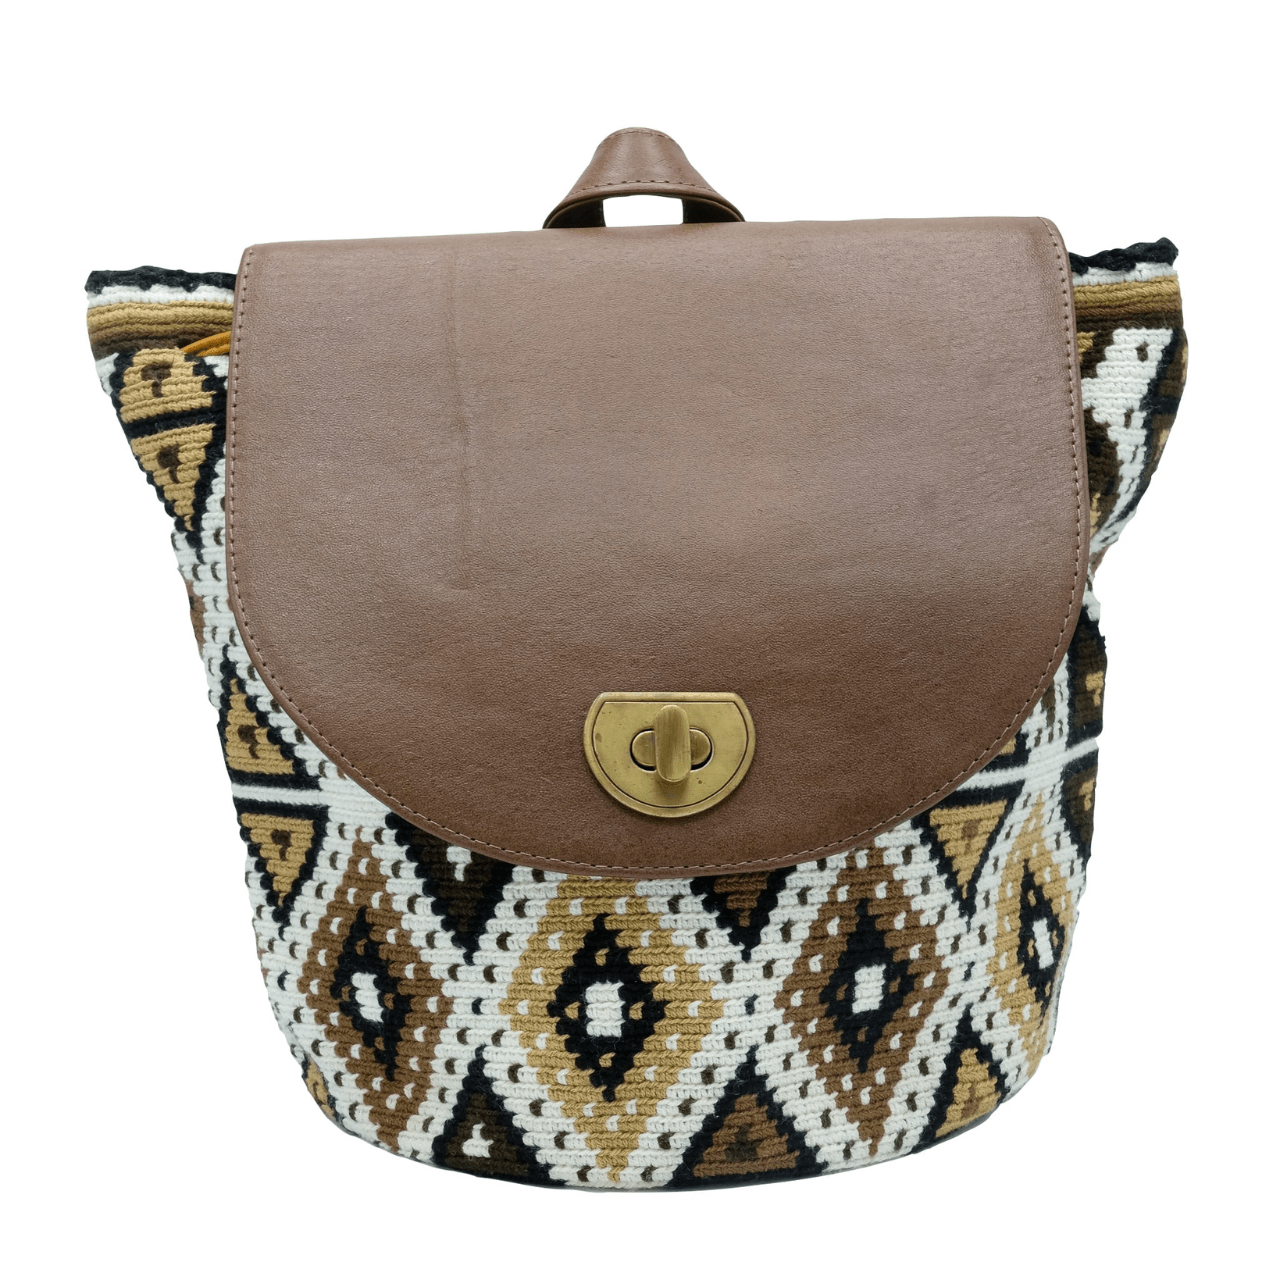 Cienaga backpack showcasing a distinctive Wayuu pattern on the body, accentuated by rich brown genuine leather details. The unique Wayuu designs are presented in an elegant blend of beige, brown, and black shades.